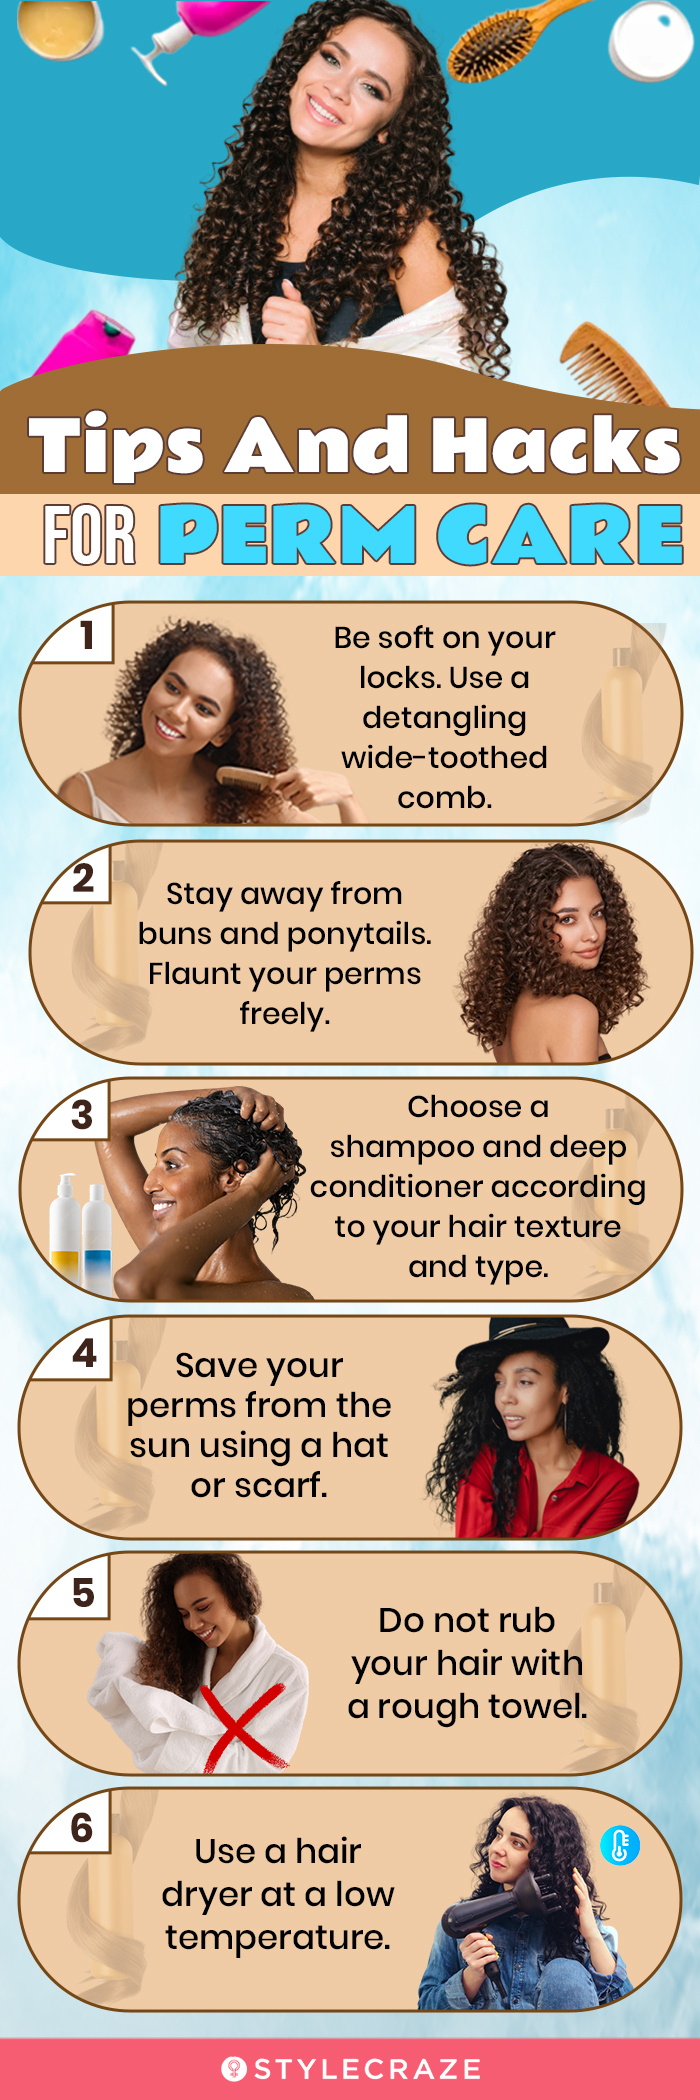 tips and hacks for perm care (infographic)